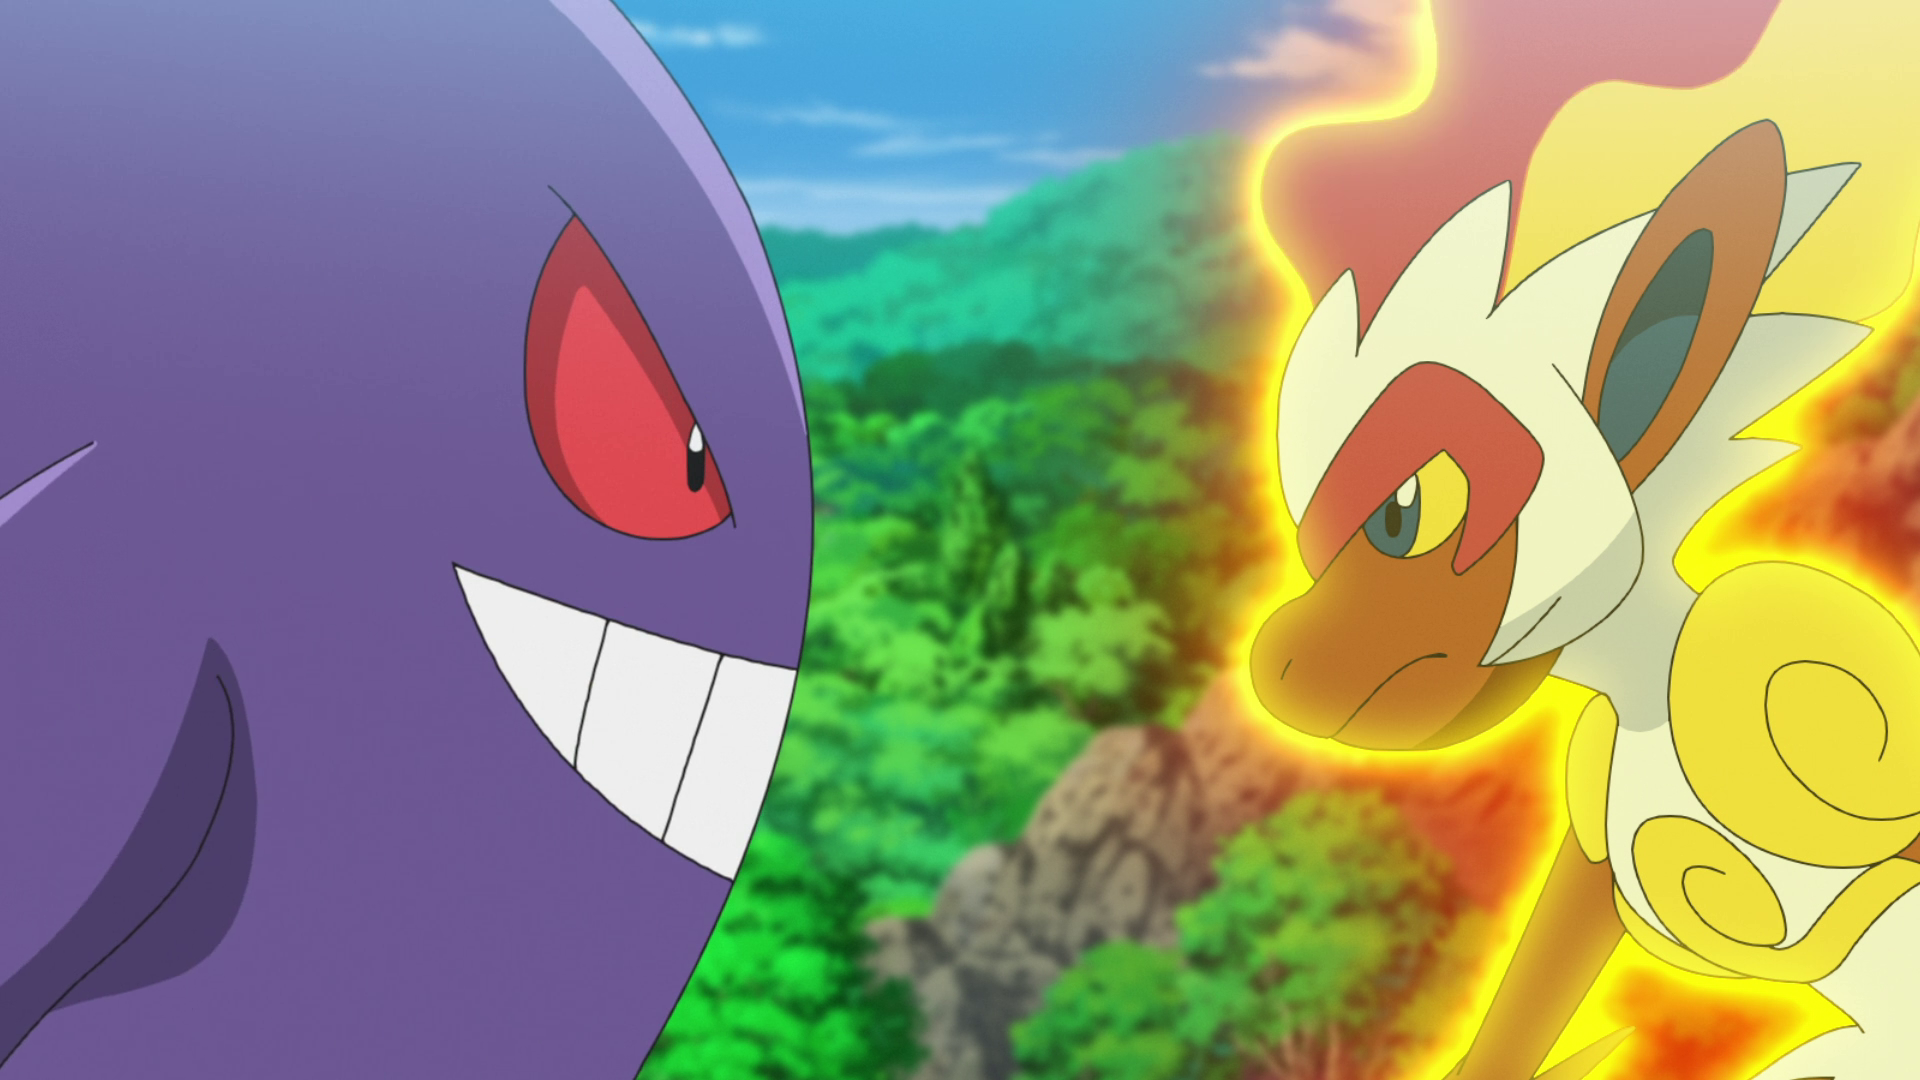 Pokémon Ultimate Journeys: The Series' to Premiere October 21st Exclusively  on Netflix in the US - aNb Media, Inc.